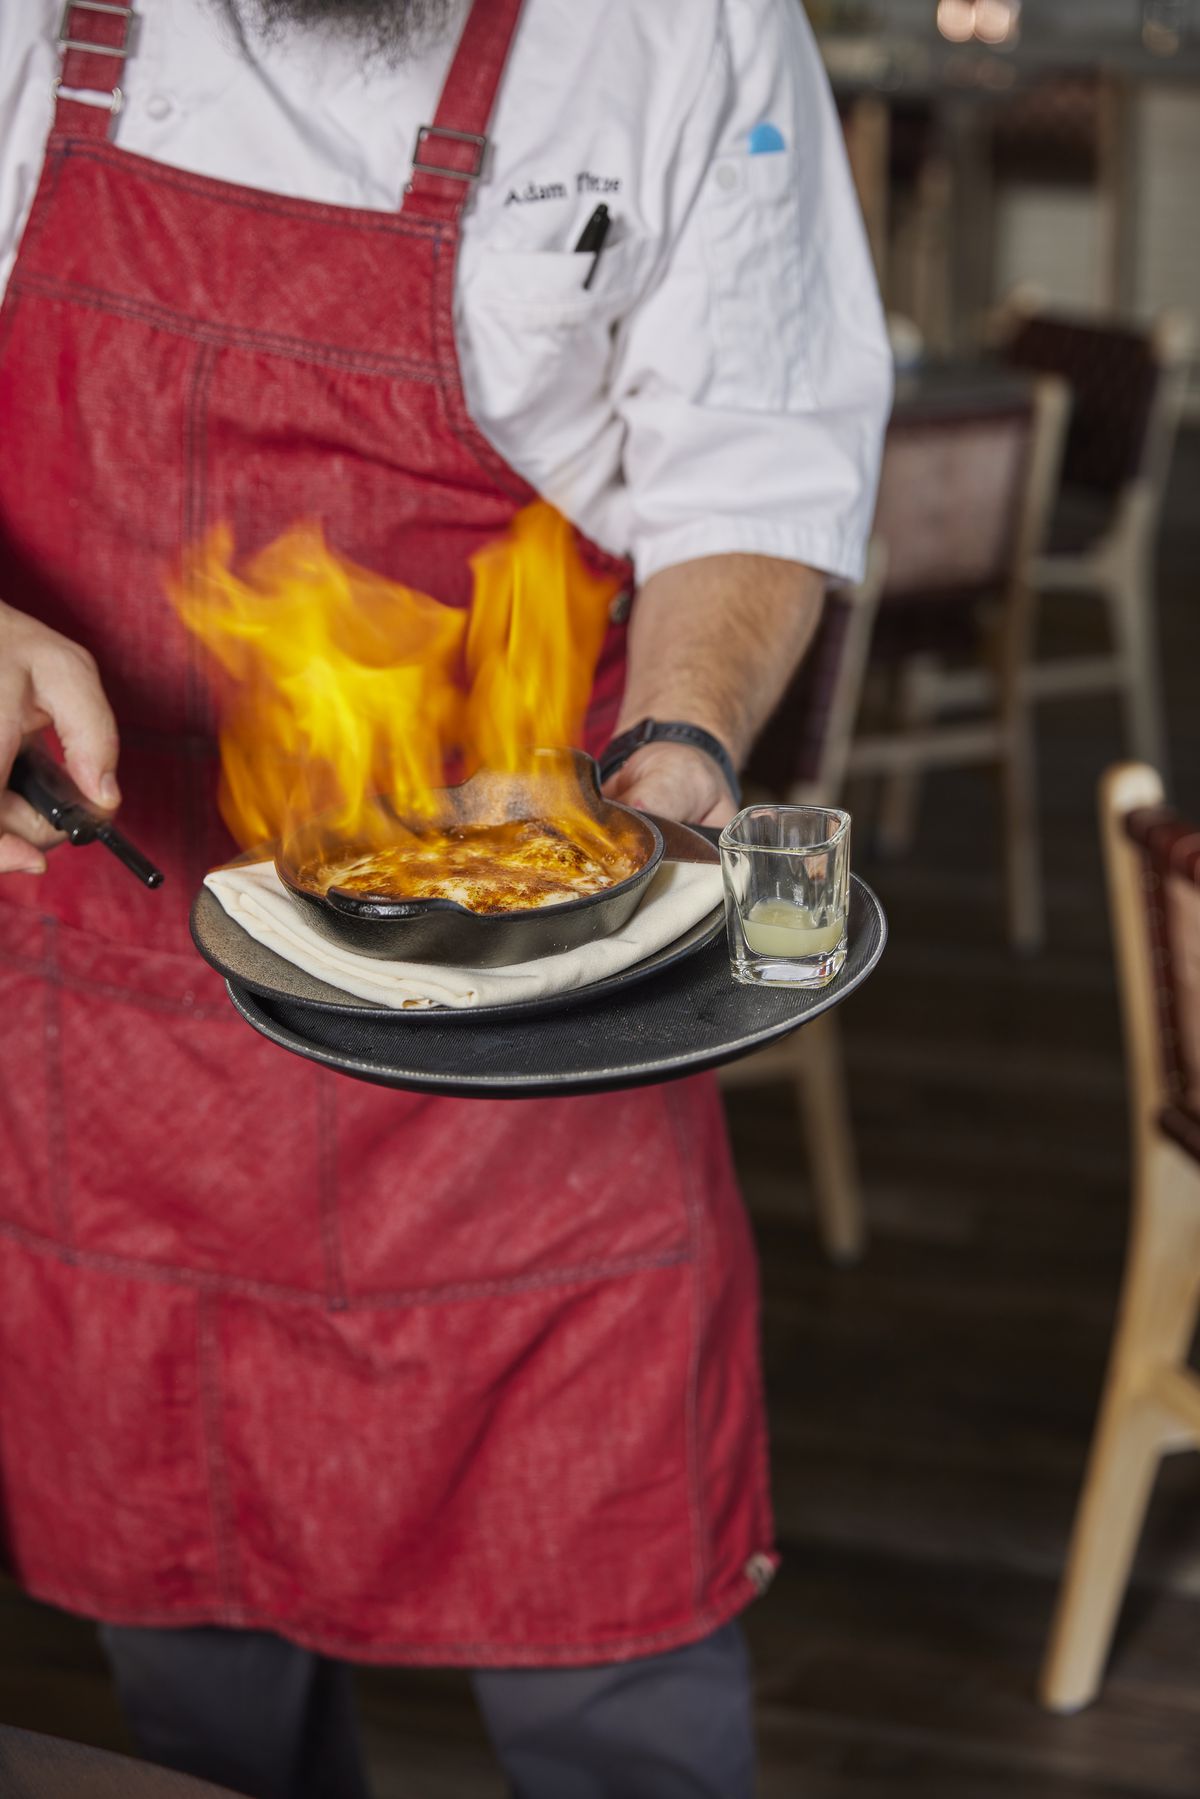 A waiter comes by with a flaming plate of cheese.